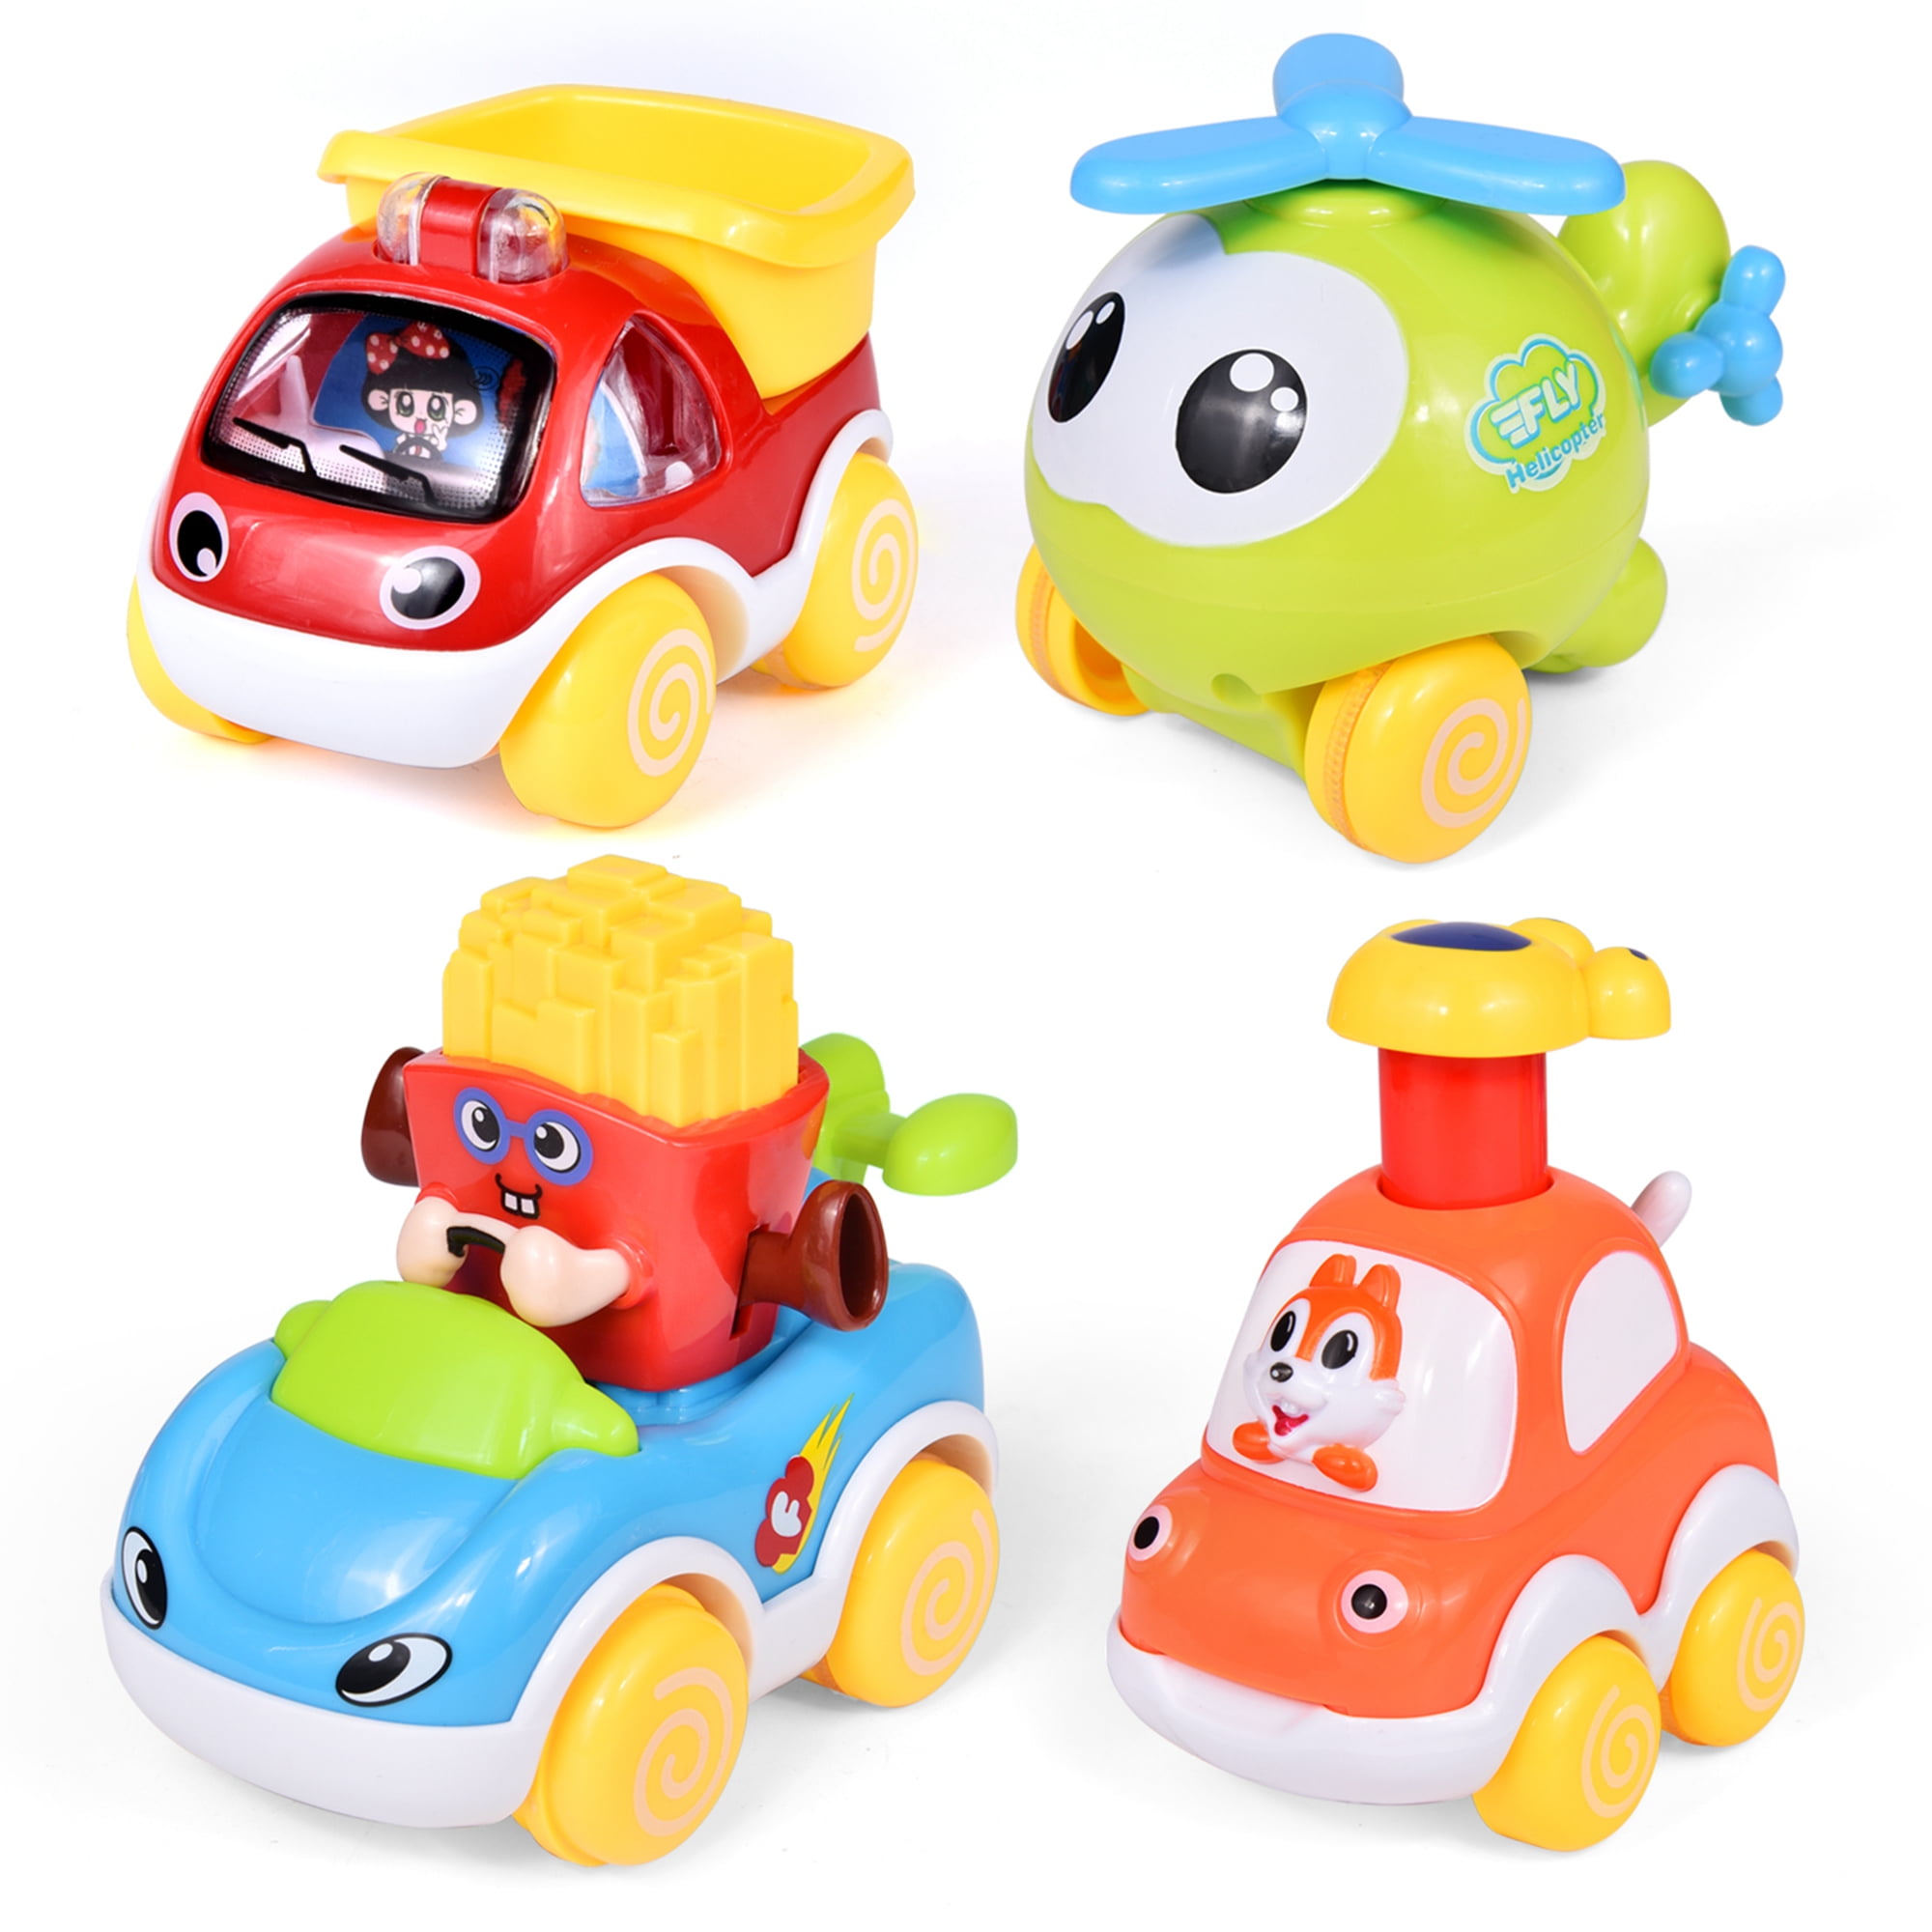 Press and Go Car, Go! Go! Smart Wheels Starter Pack Baby Toy Cars Toddler  Birthday Gift Toys Cartoon Wind up Cars for 2 Year Old Boys F-260 